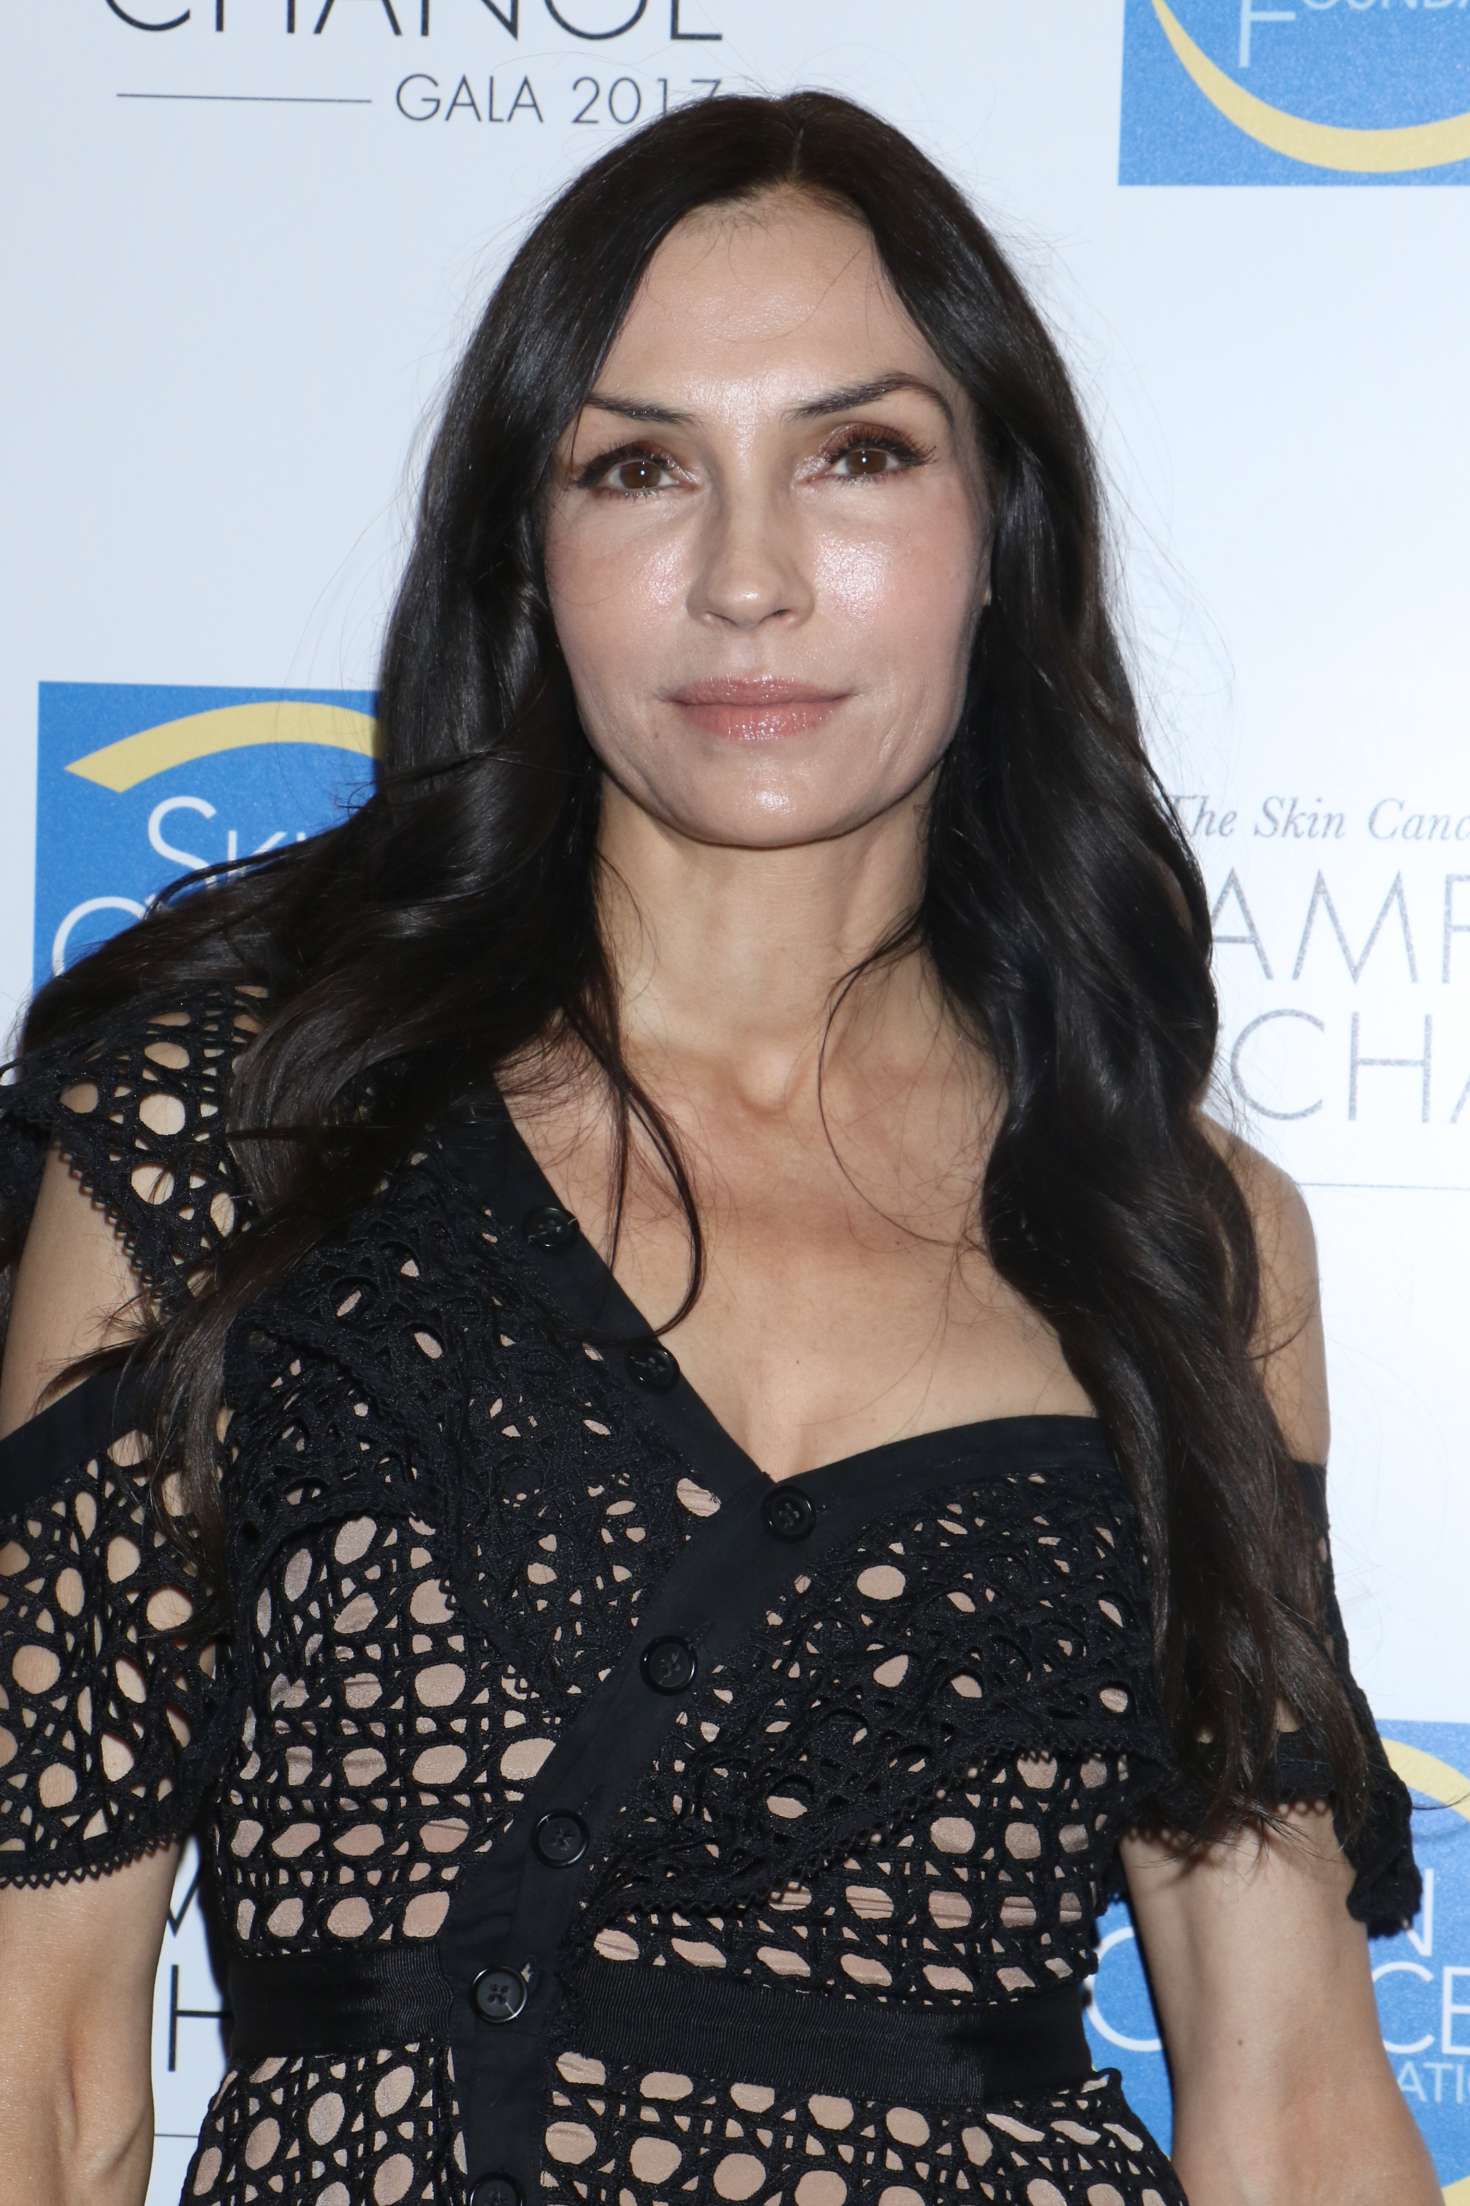 Famke Janssen - The Skin Cancer Foundation's 'Champions for Change' Gala in NY